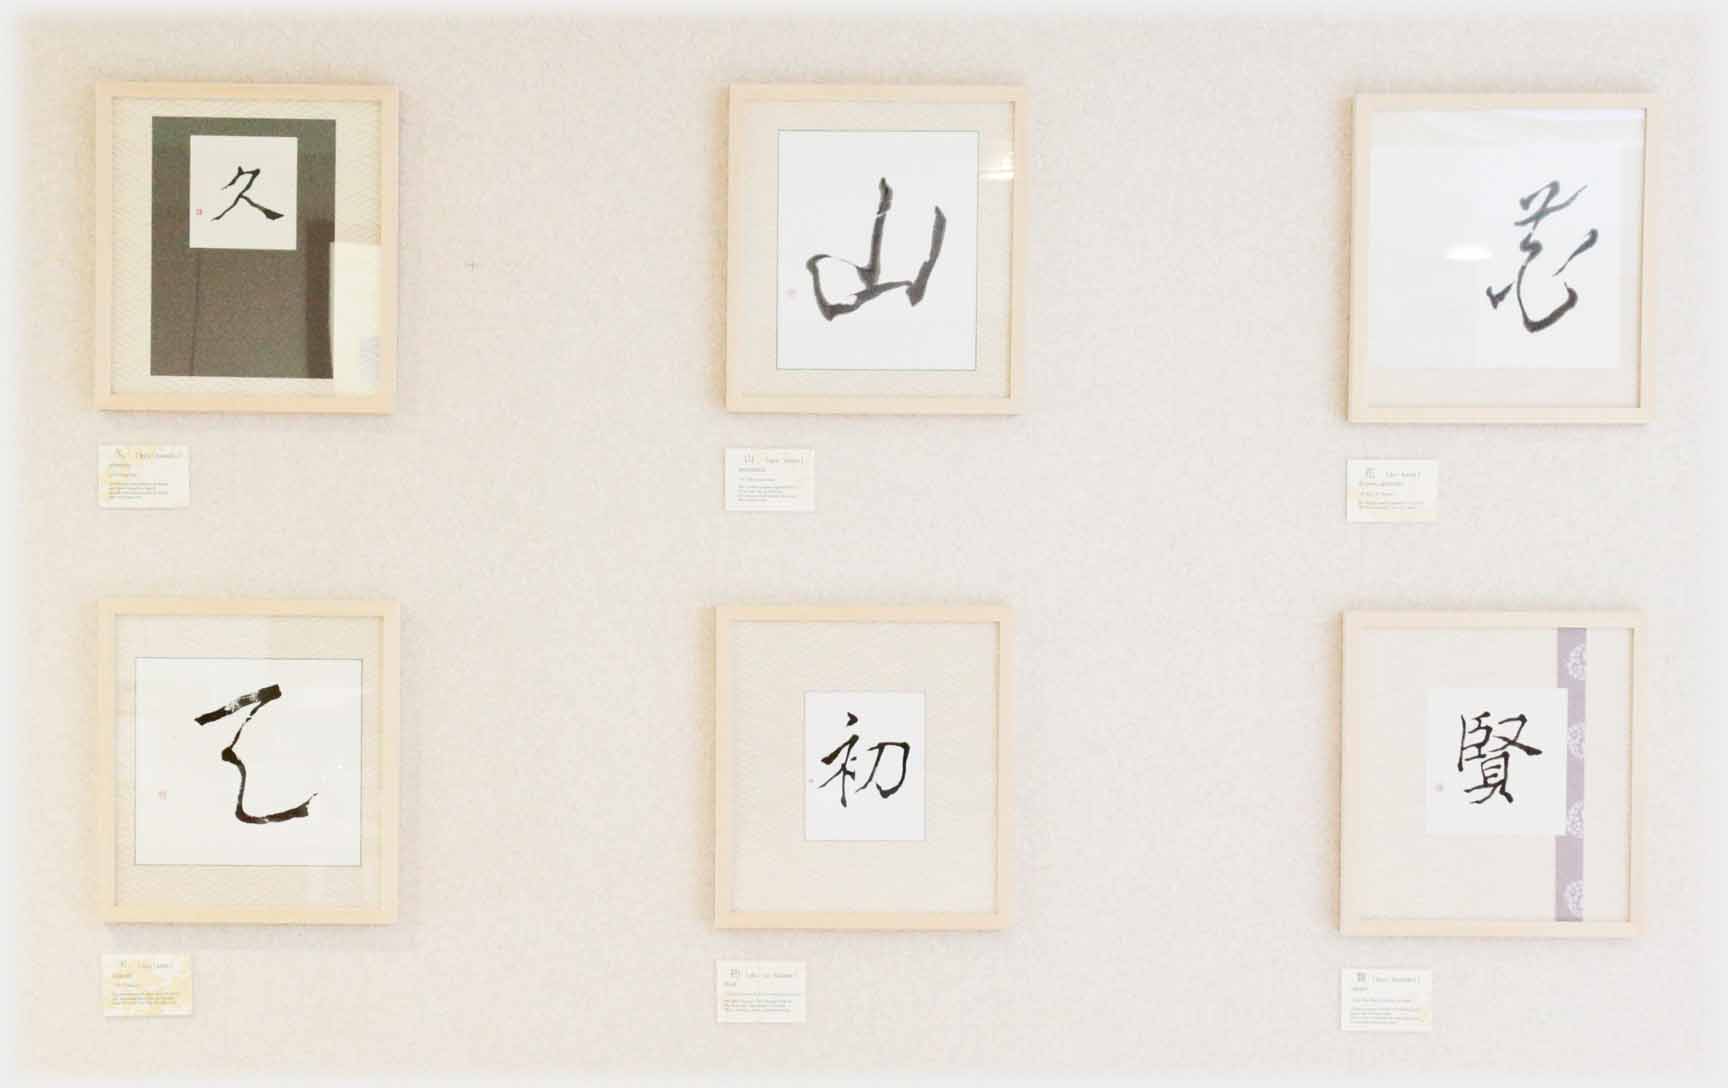 Six framed characters handing on wall.